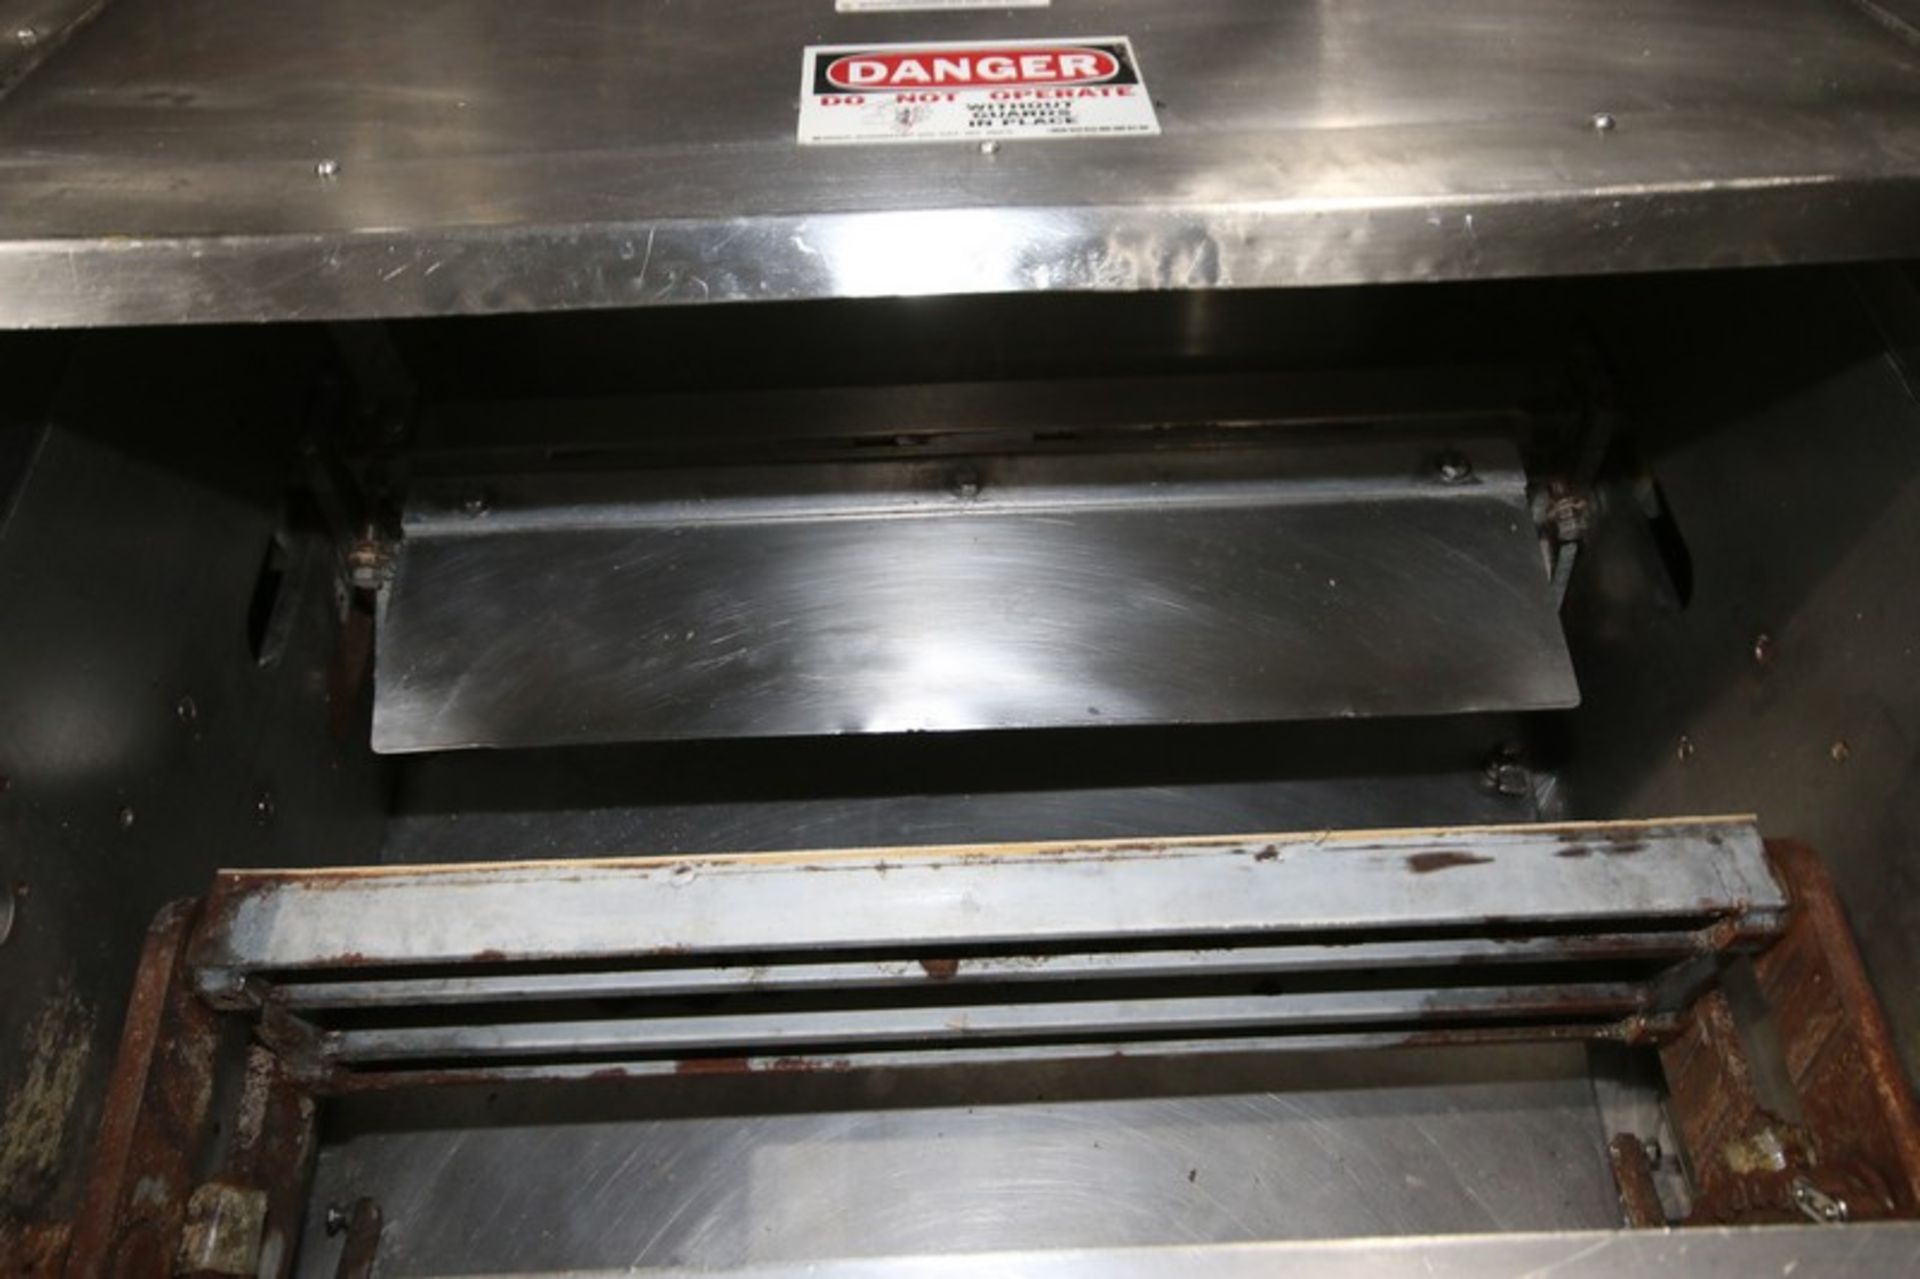 Moline 23-1/2" W S/S Guillotine, with Aprox. 24-1/2" L x 8-1/2" W Cutting Table, Mounted on S/S - Bild 2 aus 7